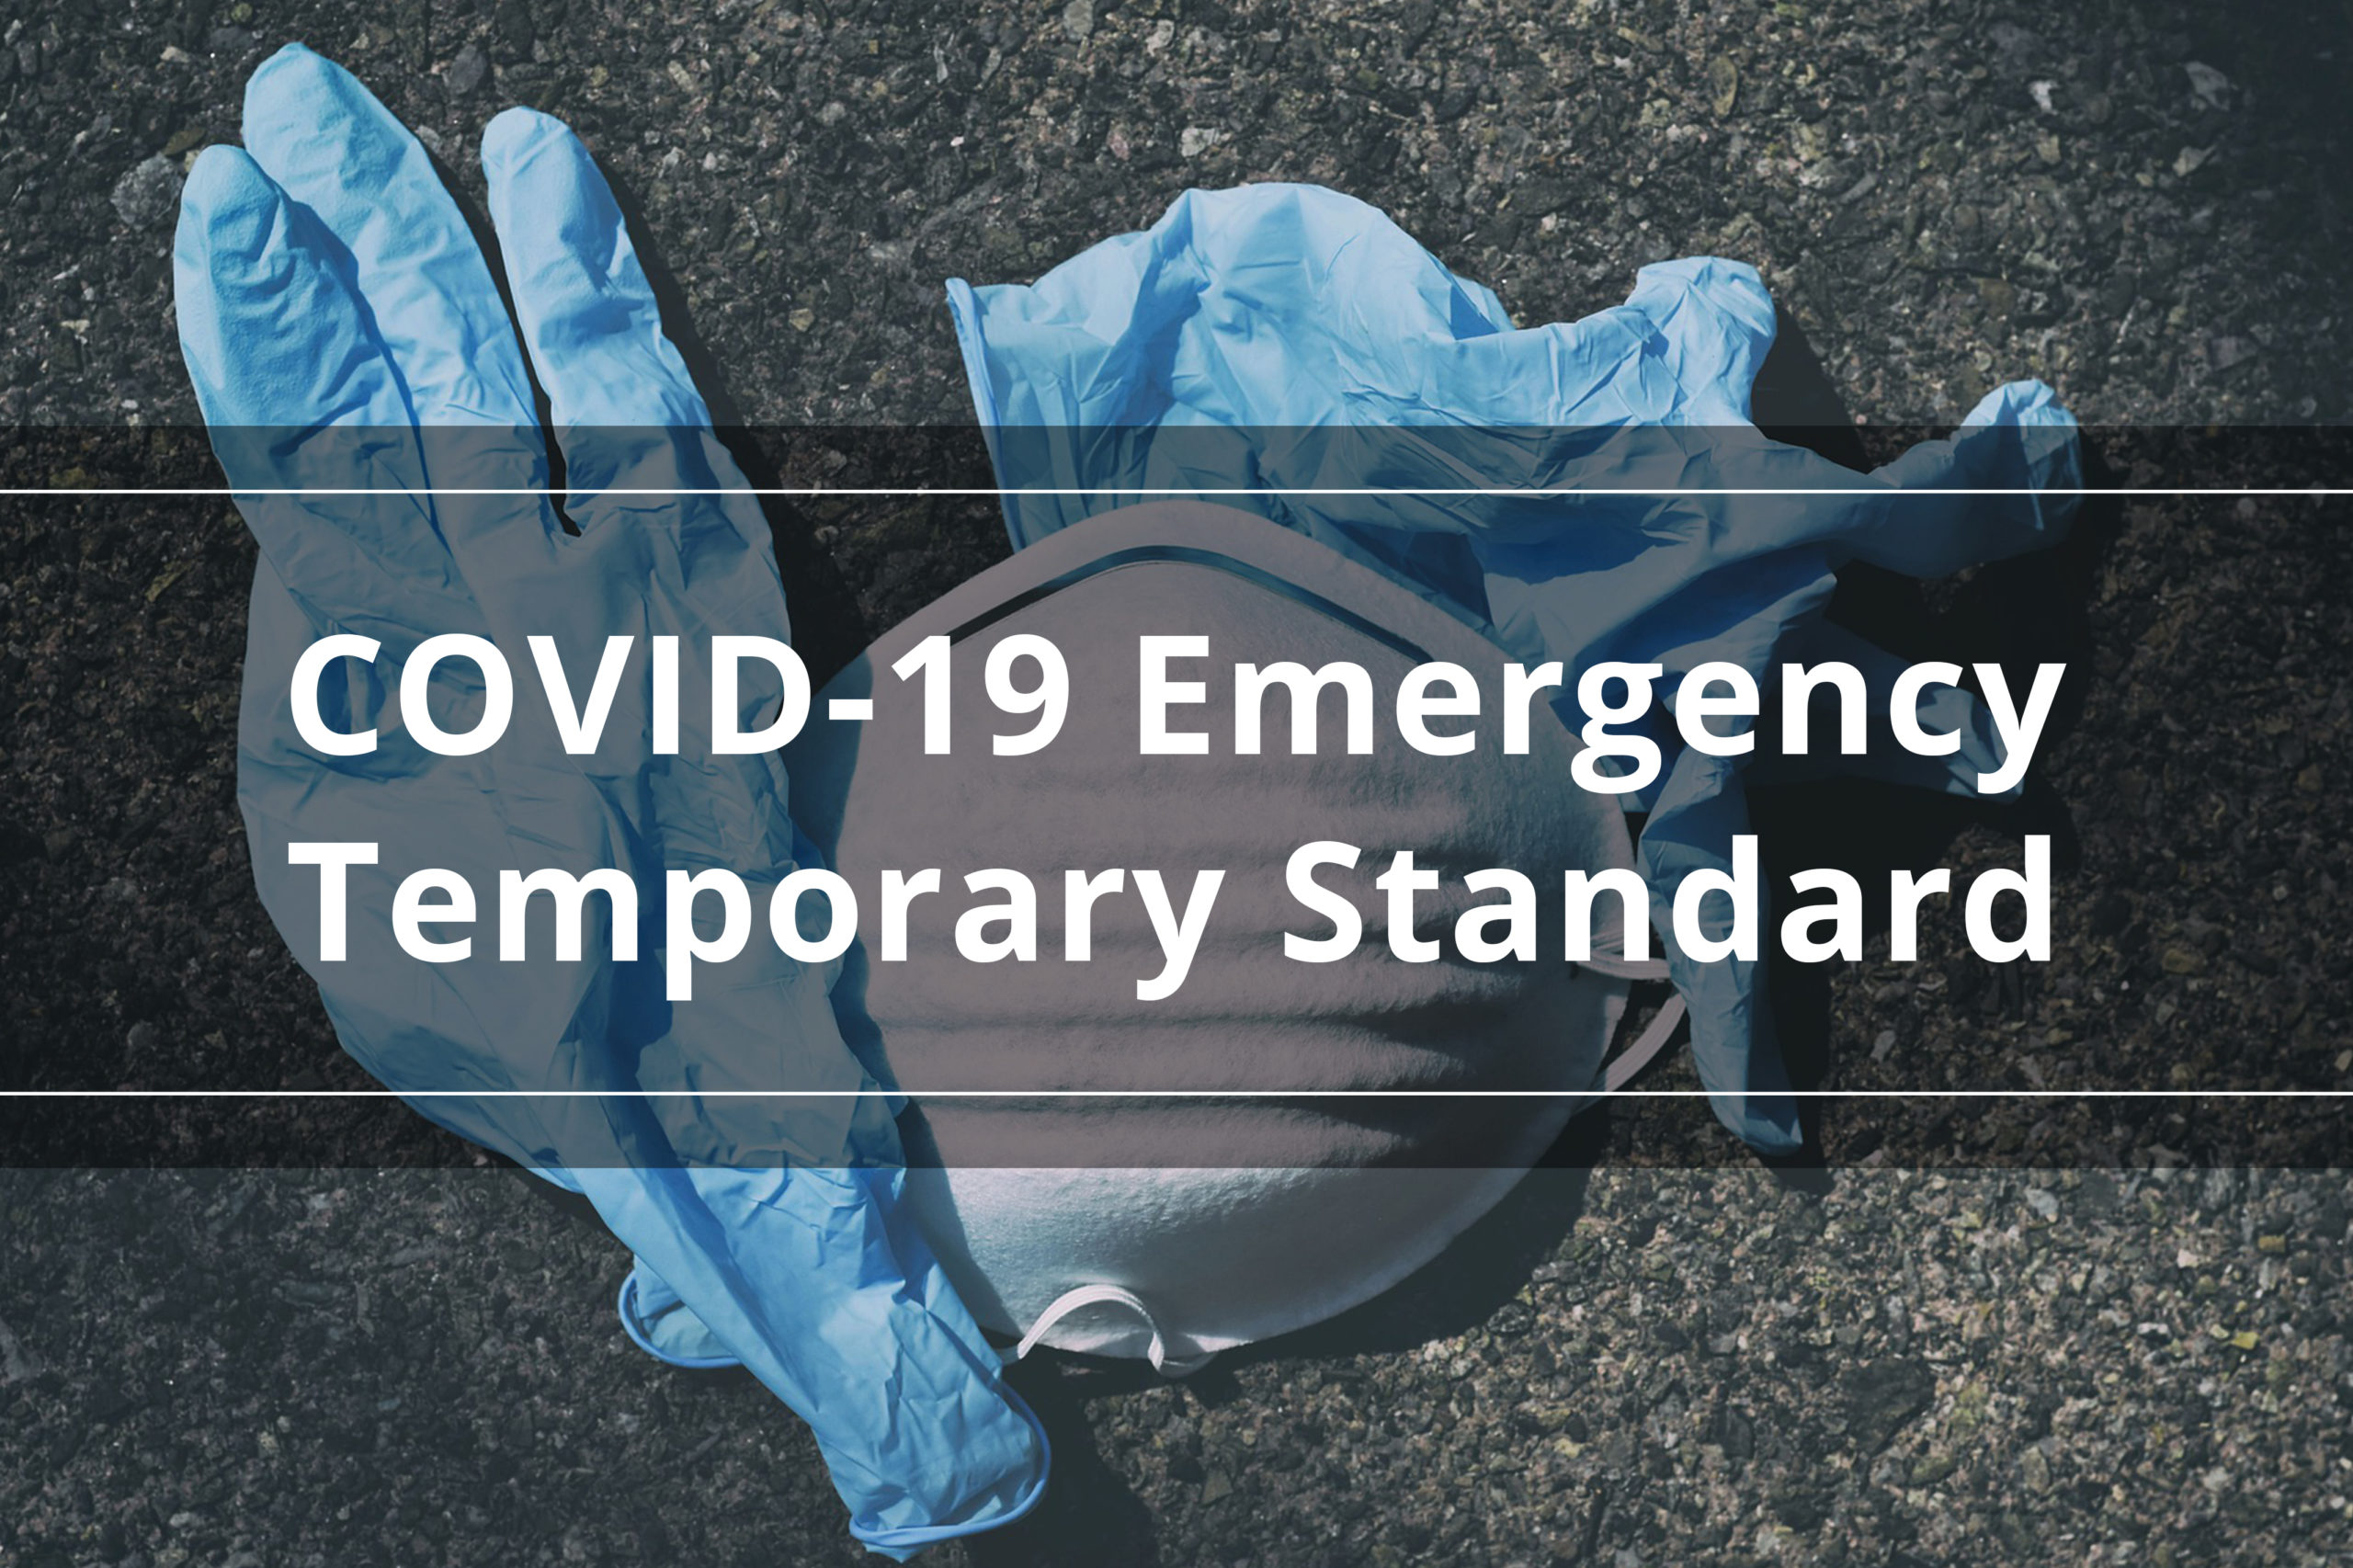 COVID-19 Emergency Temporary Standard - Shaw Law Group